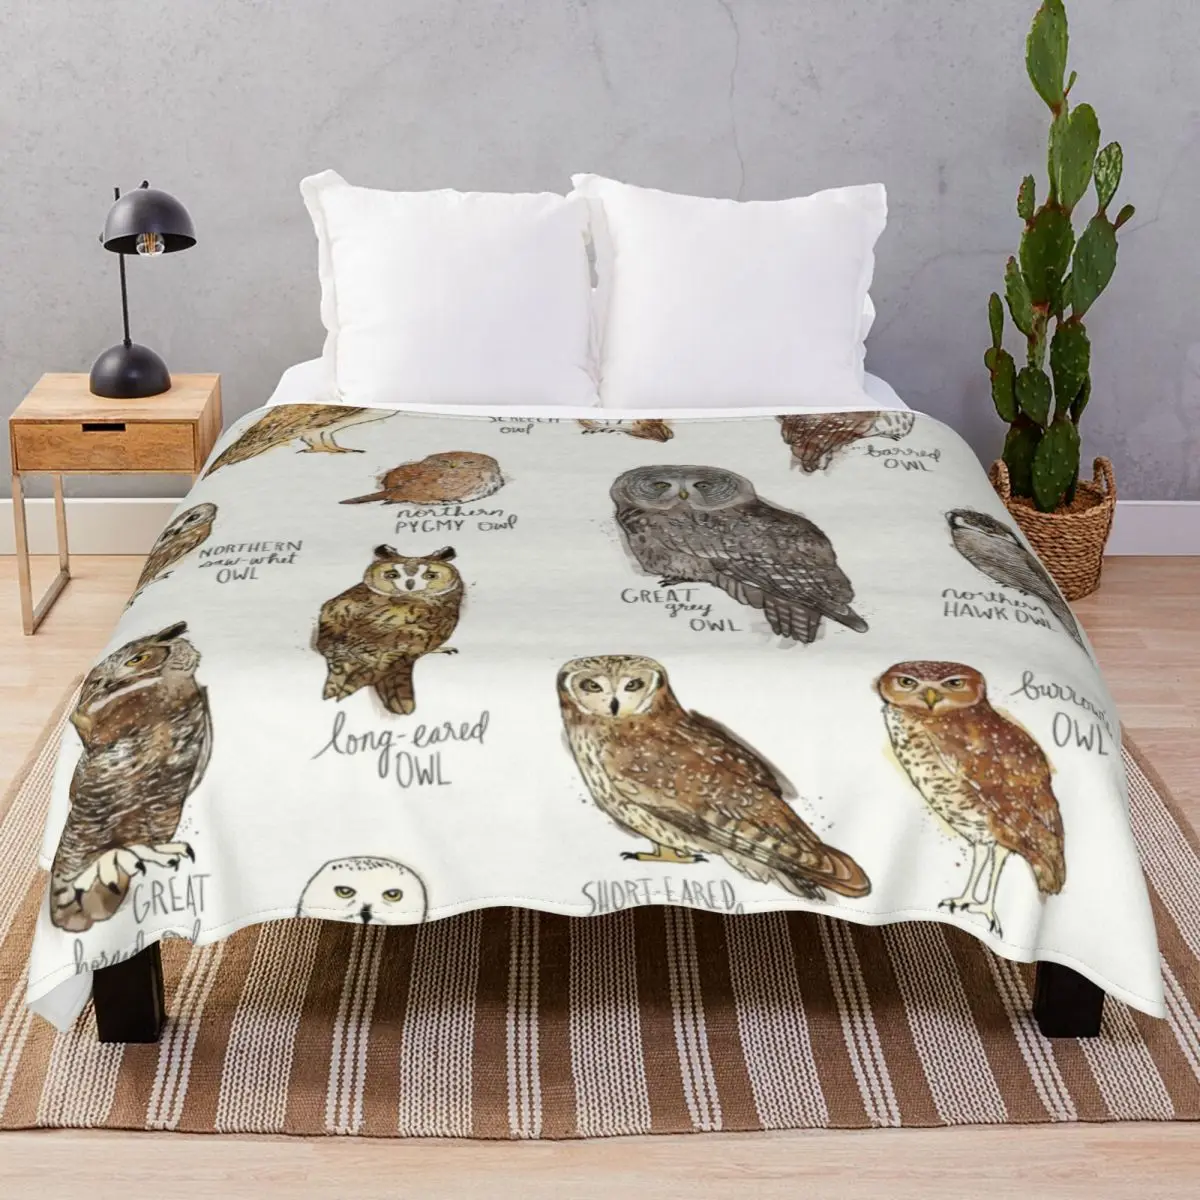 Owls Blankets Flannel Plush Decoration Super Soft Throw Blanket for Bed Home Couch Travel Cinema